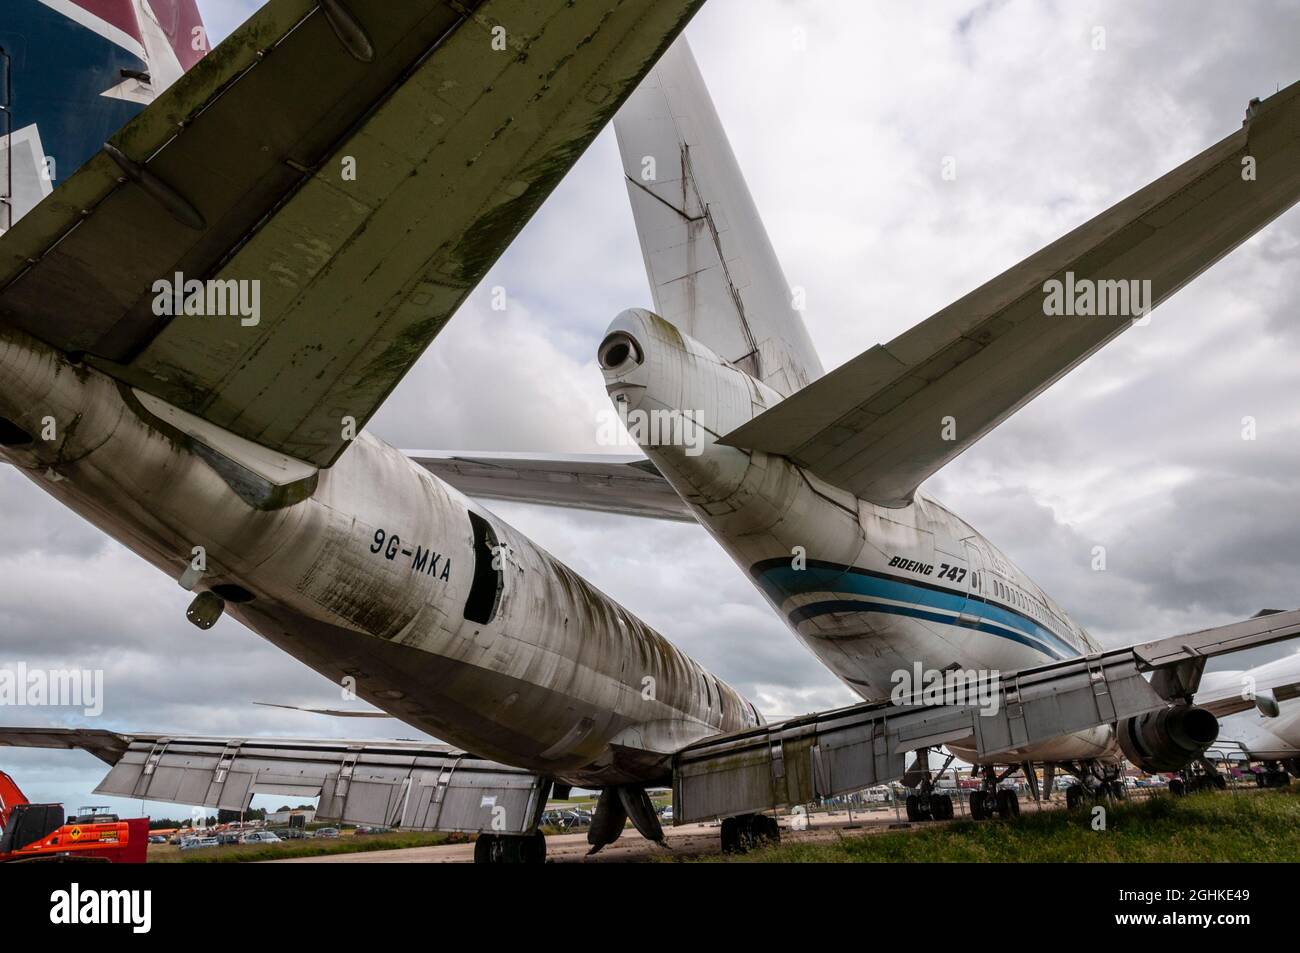 Retired Boeing 747 and DC-8 airliner planes stored pending scrapping at Manston Airport boneyard. 9G-MKA formerly MK Air Cargo Douglas DC-8 freighter Stock Photo